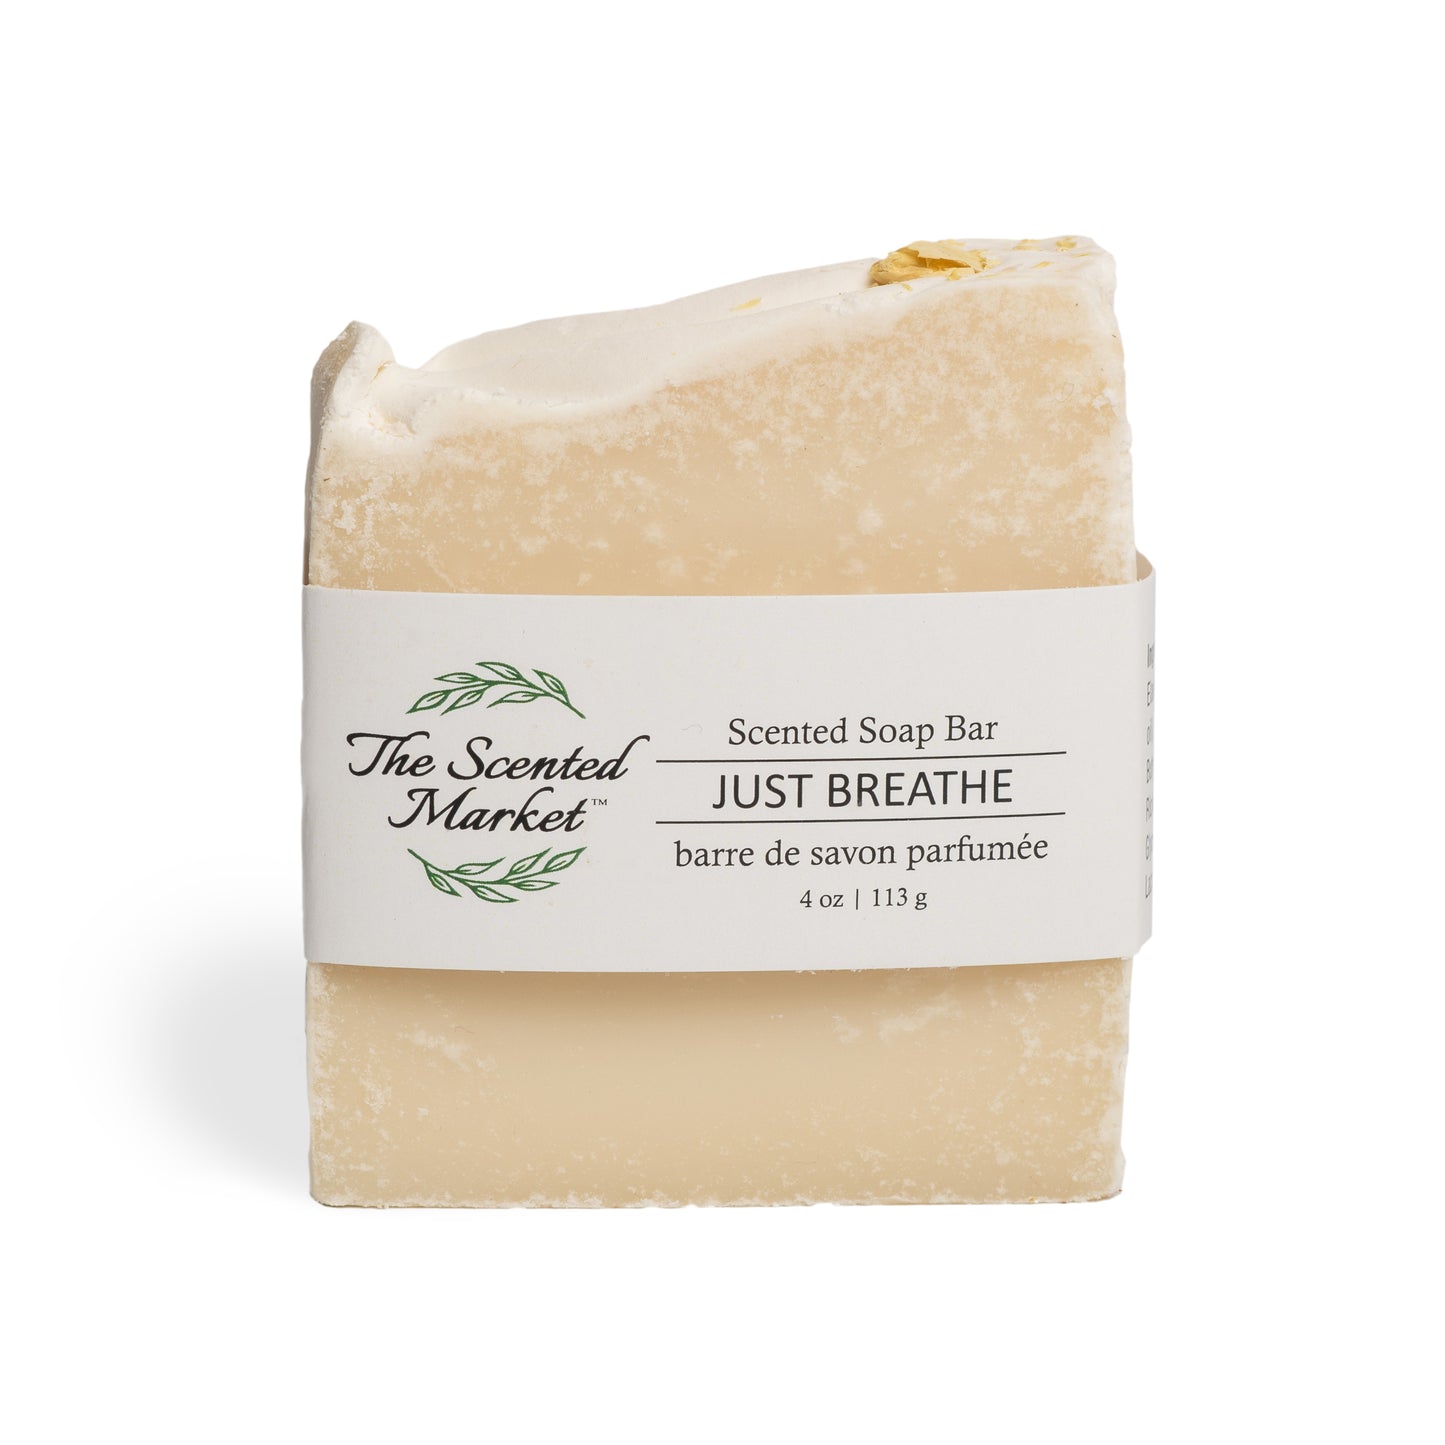 JUST BREATHE - Scented Soap Bar